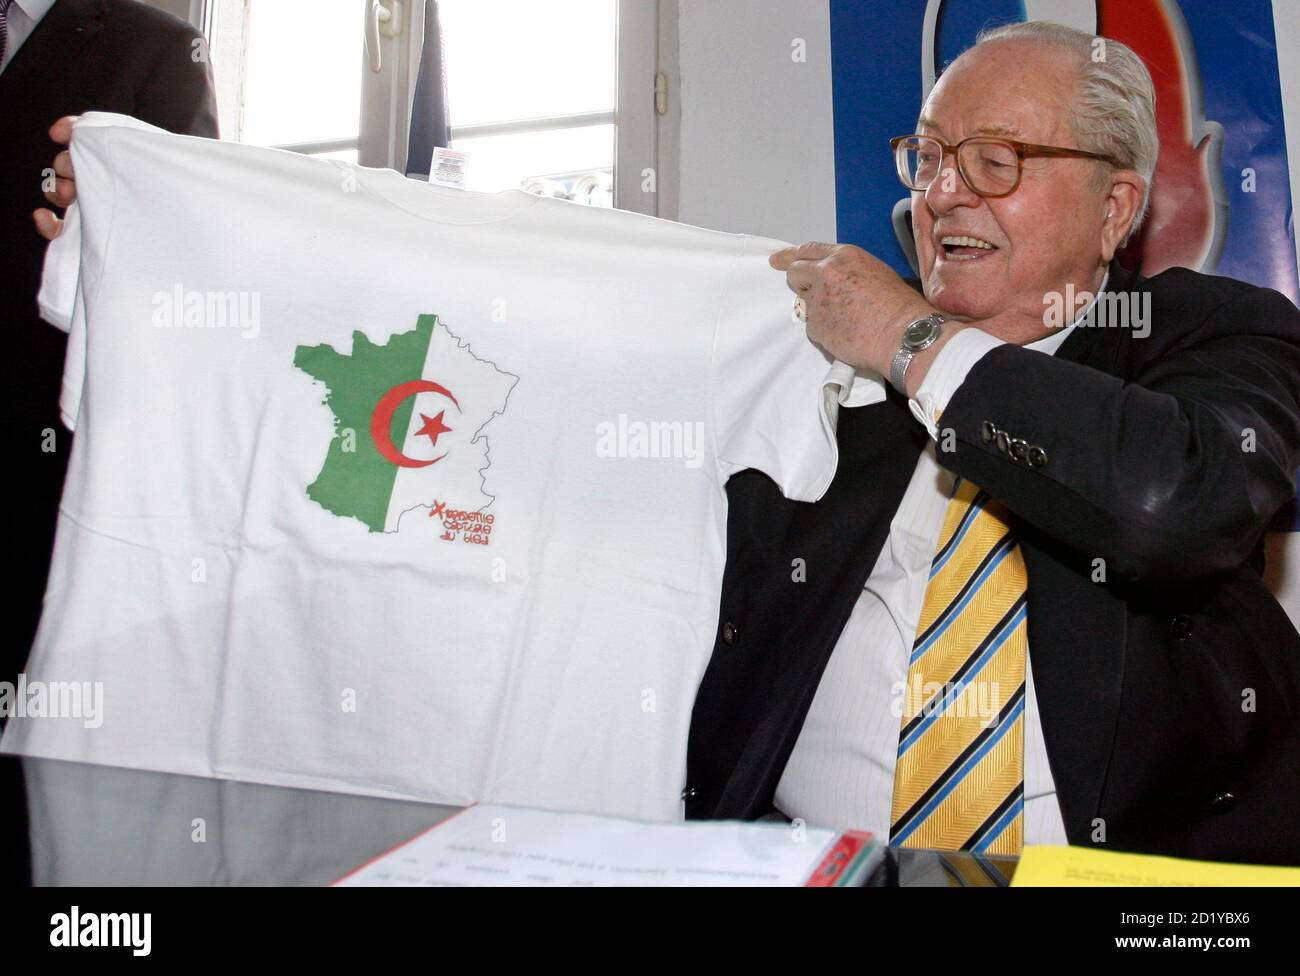 France's far-right National Front political party leader Jean-Marie Le Pen  holds a t-shirt with the Algerian flag on a map of France during a news  conference at the new National Front party